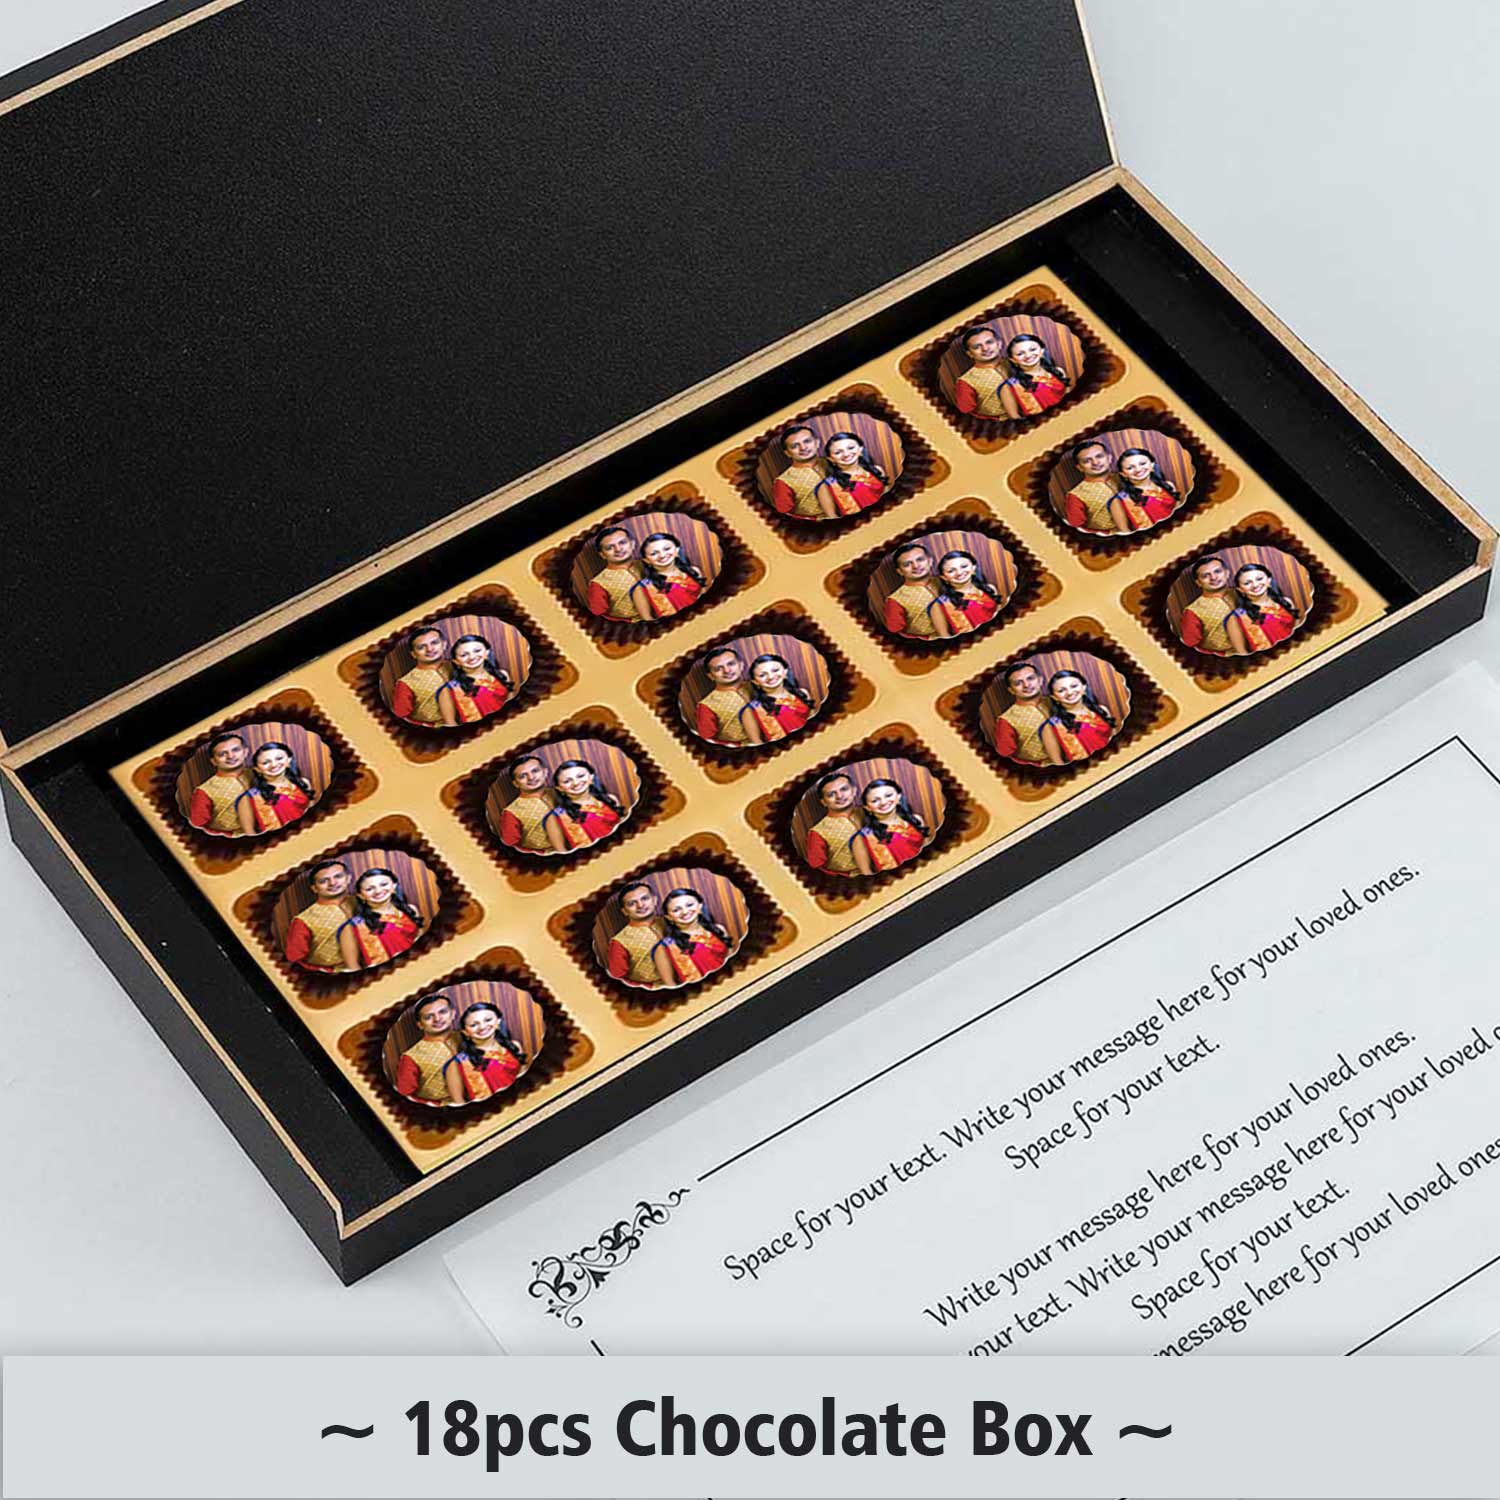 photo printed with elegant design on wooden box of chocolates